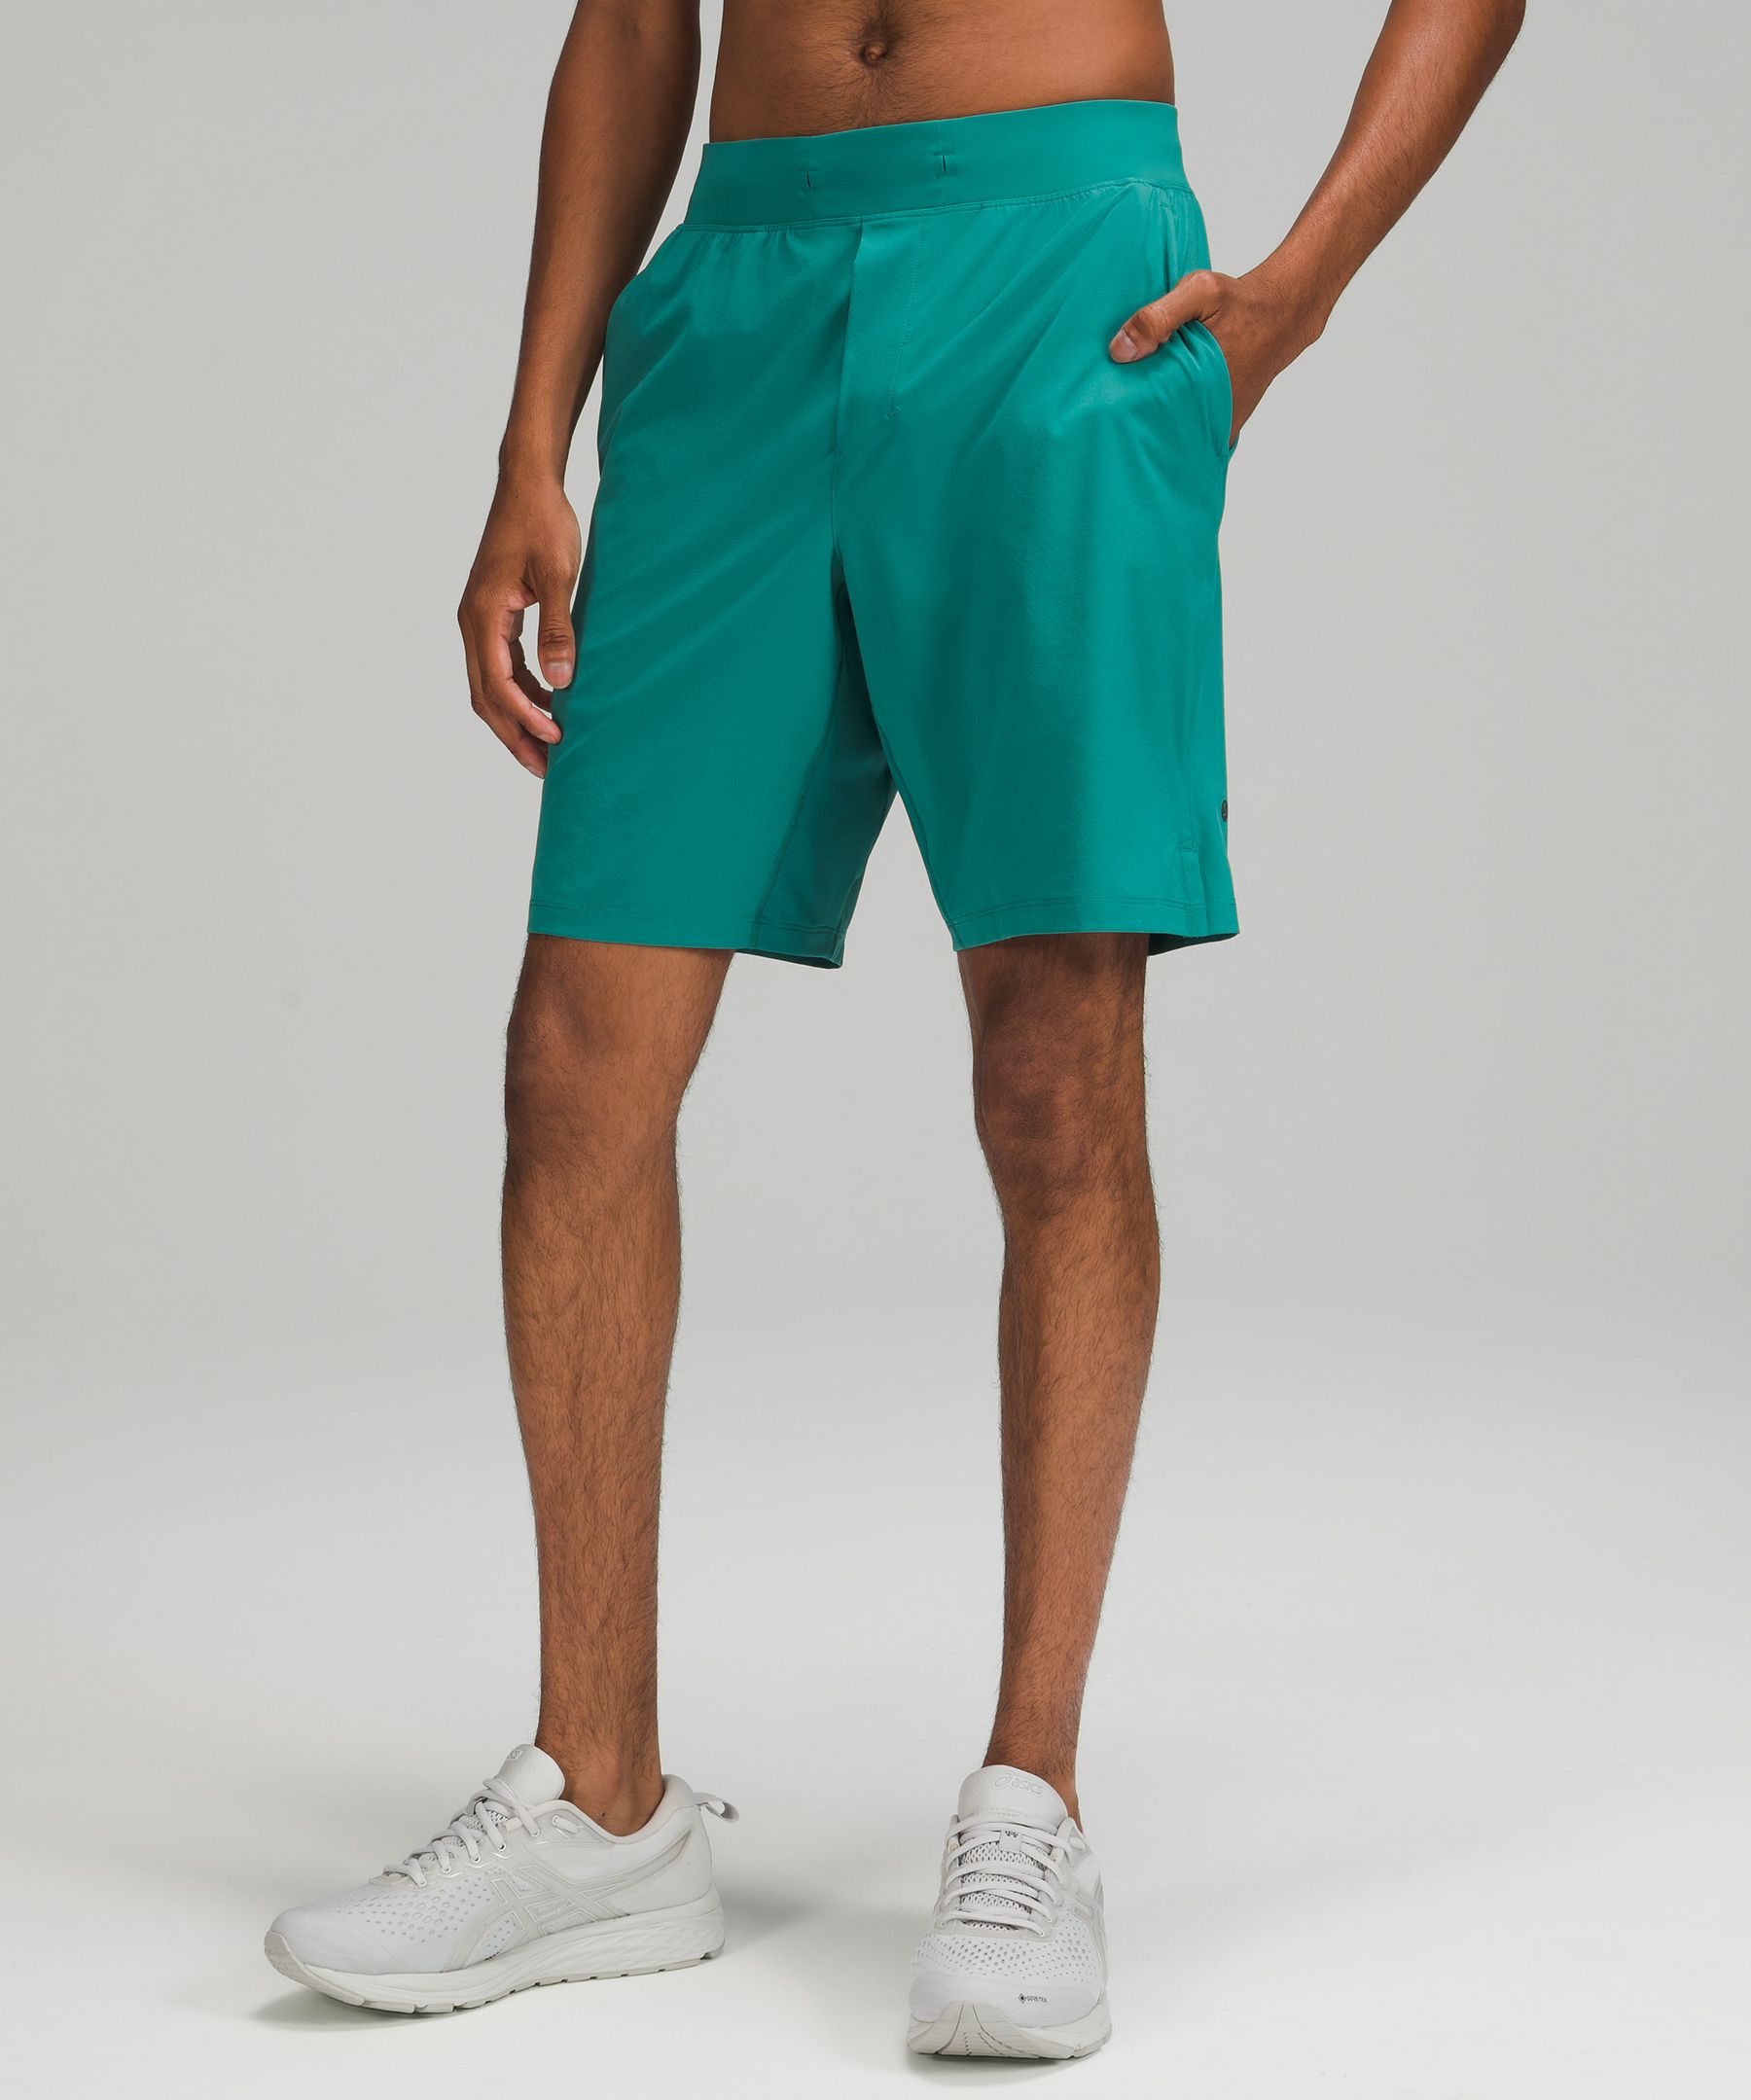 Lululemon T.h.e. Linerless Shorts 9" In Teal Lagoon